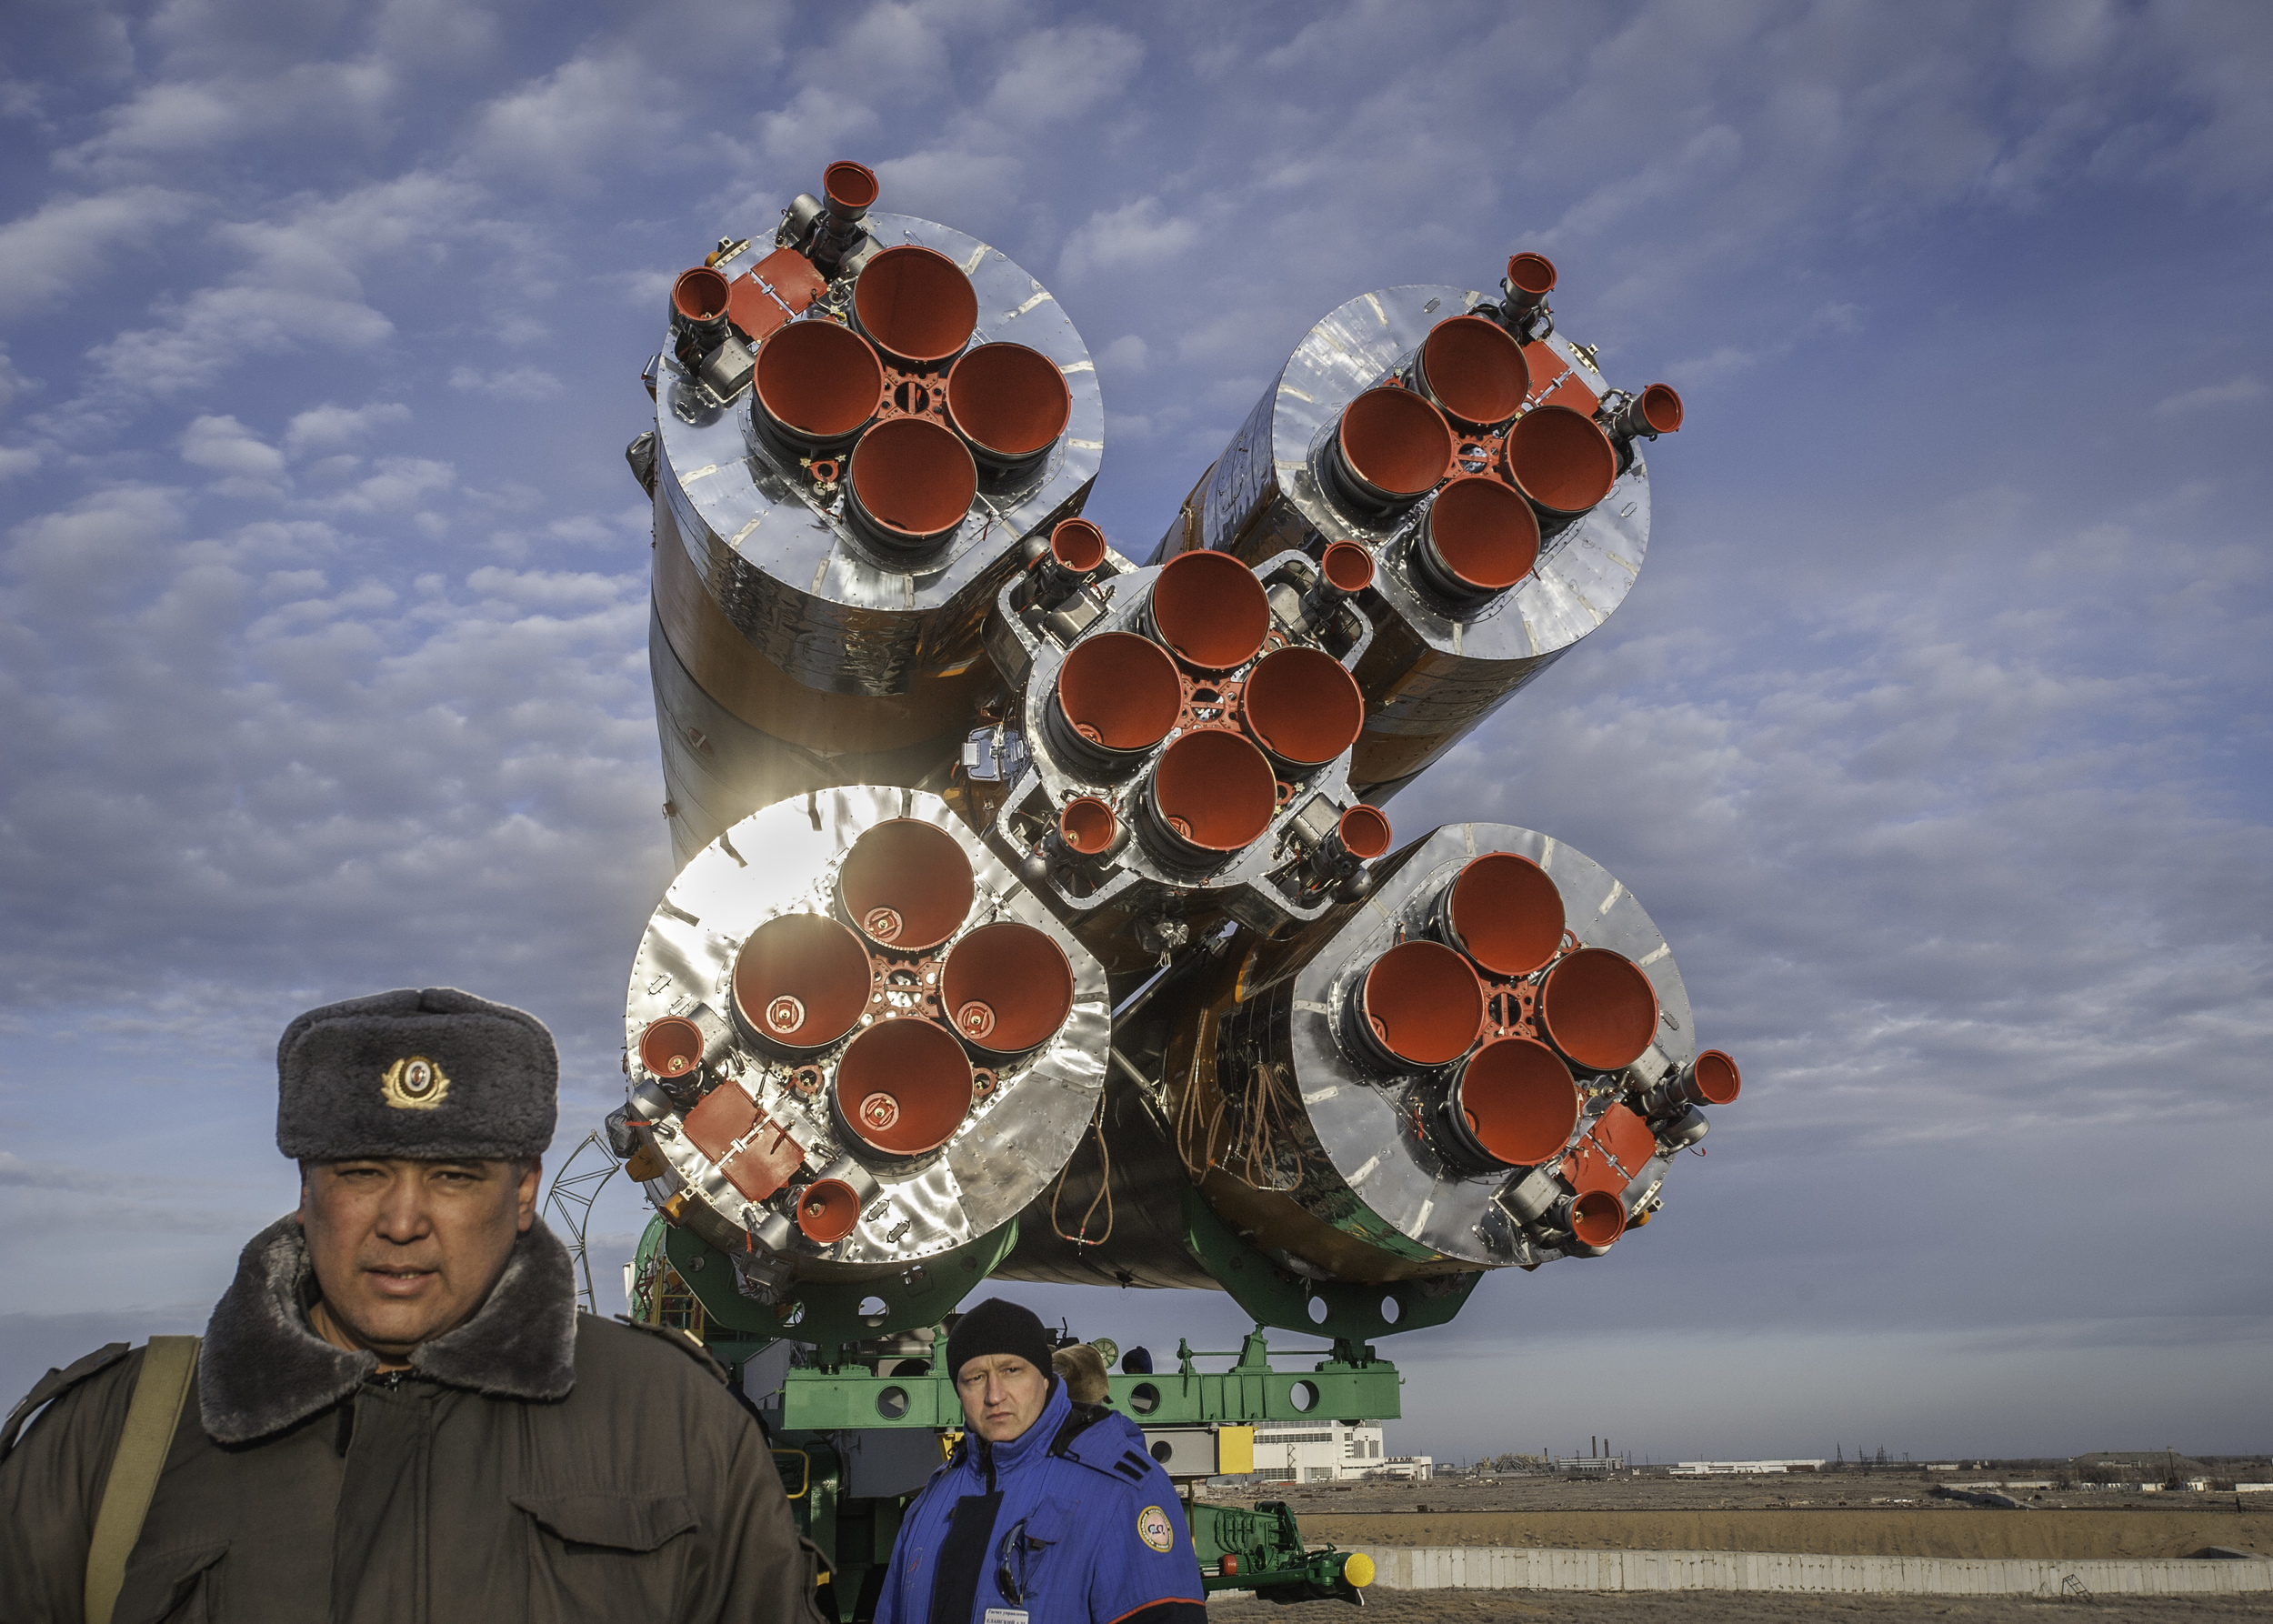  The Soyuz TMA-18 spacecraft is rolled out by train to the launch pad at the Baikonur Cosmodrome, Kazakhstan, Wednesday, March, 31, 2010. The launch of the Soyuz spacecraft with Expedition 23 Soyuz Commander Alexander Skvortsov of Russia, Flight Engi